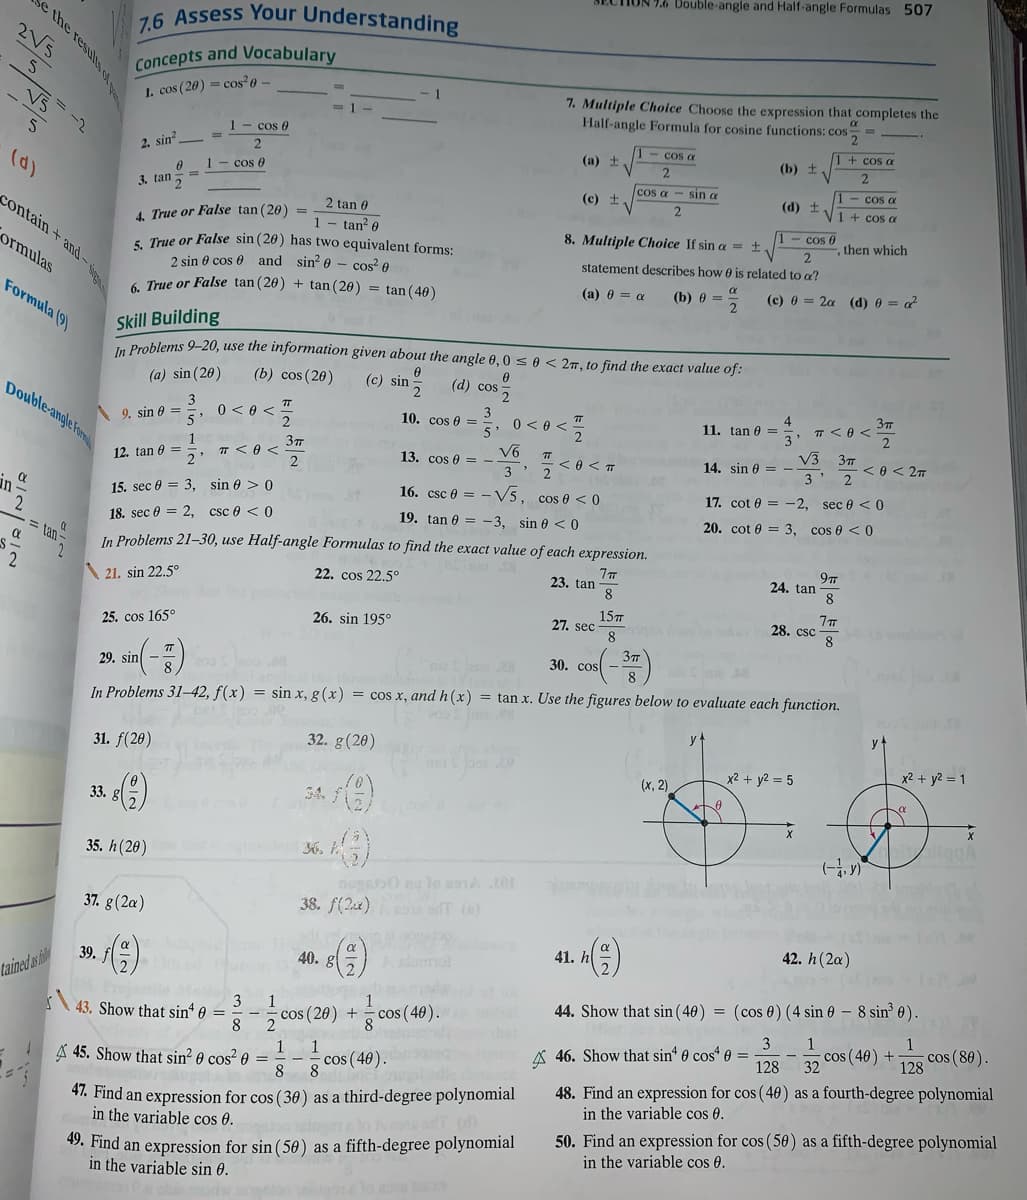 ION 7.6 Double-angle and Half-angle Formulas 507
7.6 Assess Your Understanding
2V5
Concepts and Vocabulary
7. Multiple Choice Choose the expression that completes the
Half-angle Formula for cosine functions: cos
1. cos (20) = cos 0
1-cos 0
cos a
1+ cos a
2. sin
(a) t
(b) +
2
(d)
1 cos 0
cos a
sin a
1- cos a
3. tan5
(c) +
(d) +
V1 + cos a
contain + and-
2 tan 0
4. True or False tan (20) =
1
tan e
cos 0
then which
8. Multiple Choice If sin a = ±.
s True or False sin (20) has two equivalent forms:
2 sin e cos 0 and sin? 0 - cos? A
( True or False tan (20) + tan (20) = tan(40)
ormulas
statement describes how e is related to a?
(a) 0 = a
(b) 0 =
(c) 0 = 2a (d) 0 = a?
Formula (9)
Skill Building
Problems 9-20, use the information given about the angle 0, 0se < 27, to find the exact value of:
(a) sin (20)
(b) cos (20)
(c) sin
(d) cos
Double-angle Form
3
3
10. cos 0 =
5'
4
11. tan 0 =
TT
0 < 0 <
5'
>0 > 0
< 0 <T
3' T <0 <
V3 37
3' 2
9. sin 0 =
2
37
12. tan 0 =
2'
1
T <0 <
13. cos e = -
e < 27
14. sin 0 =
3' 2
in
16. csc e =
- V5, cos e < 0
17. cot 0 = -2, sec 0 < 0
15. sec 0 = 3, sin 0 > 0
19. tan 0 = -3, sin e < 0
20. cot 0 = 3, cos 0 < 0
18. sec 0 = 2, csc 0 < 0
tan
In Problems 21-30, use Half-angle Formulas to find the exact value of each expression.
\21. sin 22.5°
22. cos 22.5°
23. tan
8
24. tan
8
157
27. sec
8
7
28. csc
8
26. sin 195°
25. cos 165°
37
30. cos
29. sin
In Problems 31-42, f(x) = sin x, g(x) = cos x, and h(x) = tan x. Use the figures below to evaluate each function.
y
31. f(20)
32. g(20)
x2 + y2 = 5
x2 + y2 = 1
(х, 2)
3A.
33. gl
35. h(20)
36.
nogab0 ne lo a o
38. f(2u) a T ()
37. g(2a)
42. h(2a)
41. h
39.
40.
A slumol
tained as i
44. Show that sin (40) = (cos 0) (4 sin 0 – 8 sin° 0).
3
43. Show that sin“ 0 =
8
1
cos (20) + cos (46).
1
cos (80).
3
A 46. Show that sin" 0 cos“ e =
128
1
cos (40) + 128°
1
1
32
A 45. Show that sin? 0 cos² 0
cos (40).
48. Find an expression for cos ( 40) as a fourth-degree polynomial
in the variable cos 0.
8
4%. Find an expression for cos ( 30) as a third-degree polynomial
in the variable cos 0.
49. Find an expression for sin ( 50) as a fifth-degree polynomial
in the variable sin 0.
50. Find an expression for cos ( 50) as a fifth-degree polynomial
in the variable cos 0.
the results of
